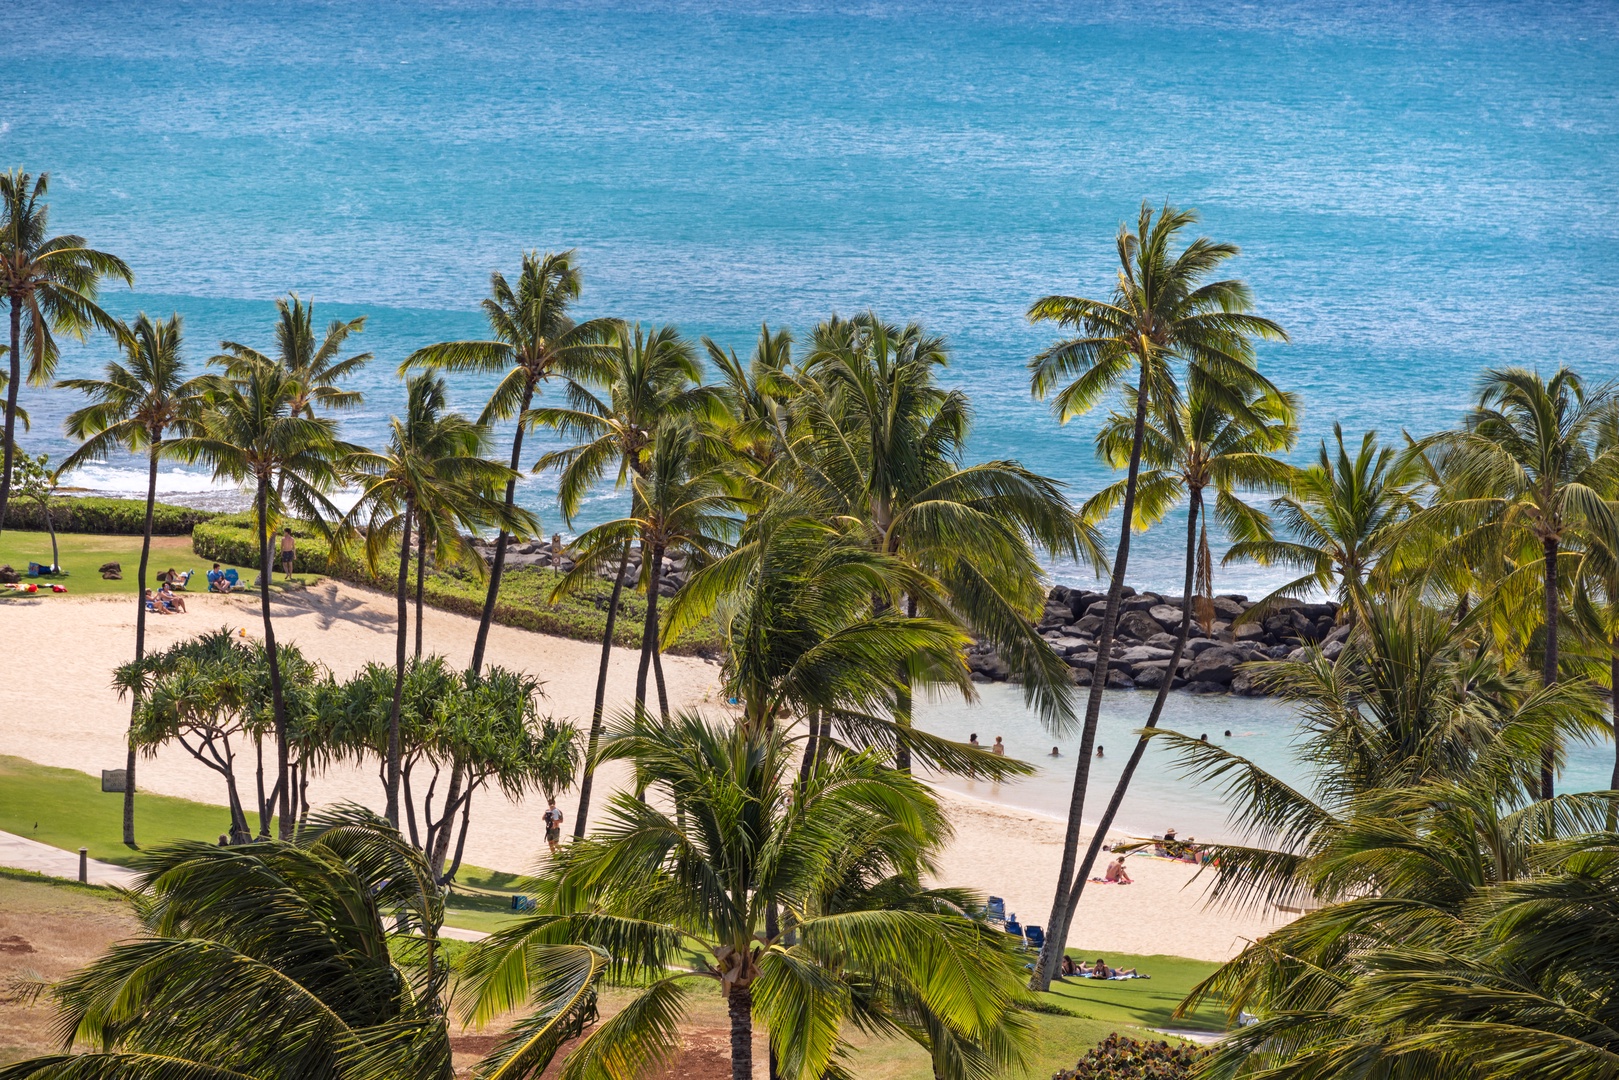 Kapolei Vacation Rentals, Ko Olina Beach Villas O1004 - The lagoon is the perfect spot to relax under the trees and enjoy the beach..